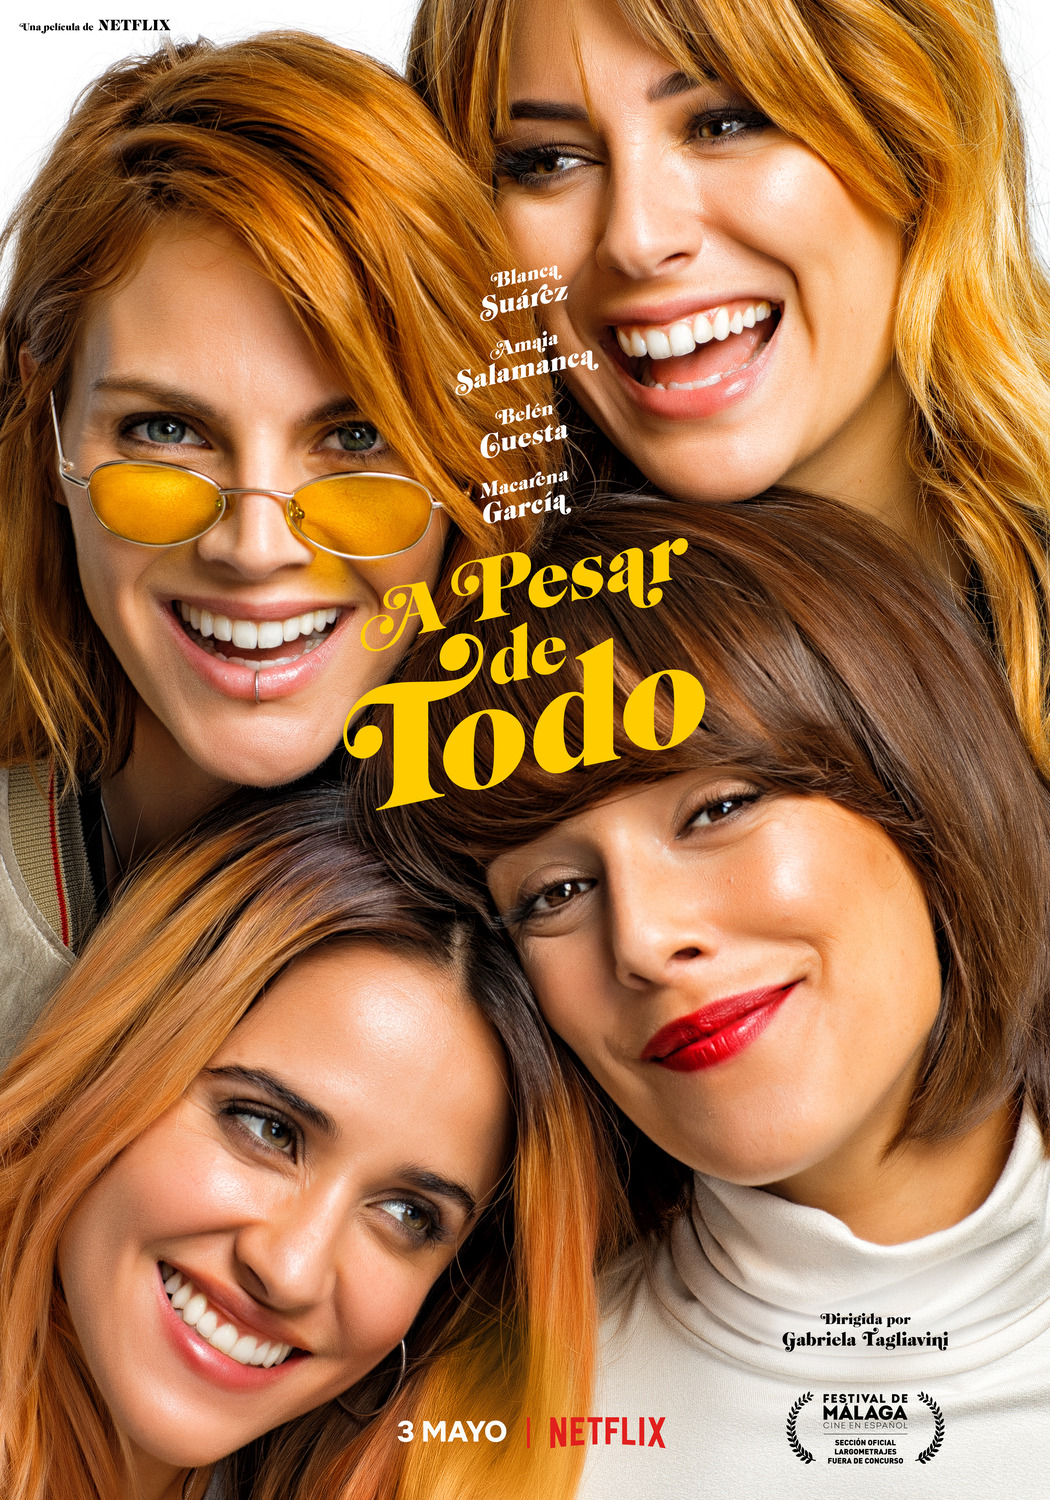 Extra Large TV Poster Image for A pesar de todo 